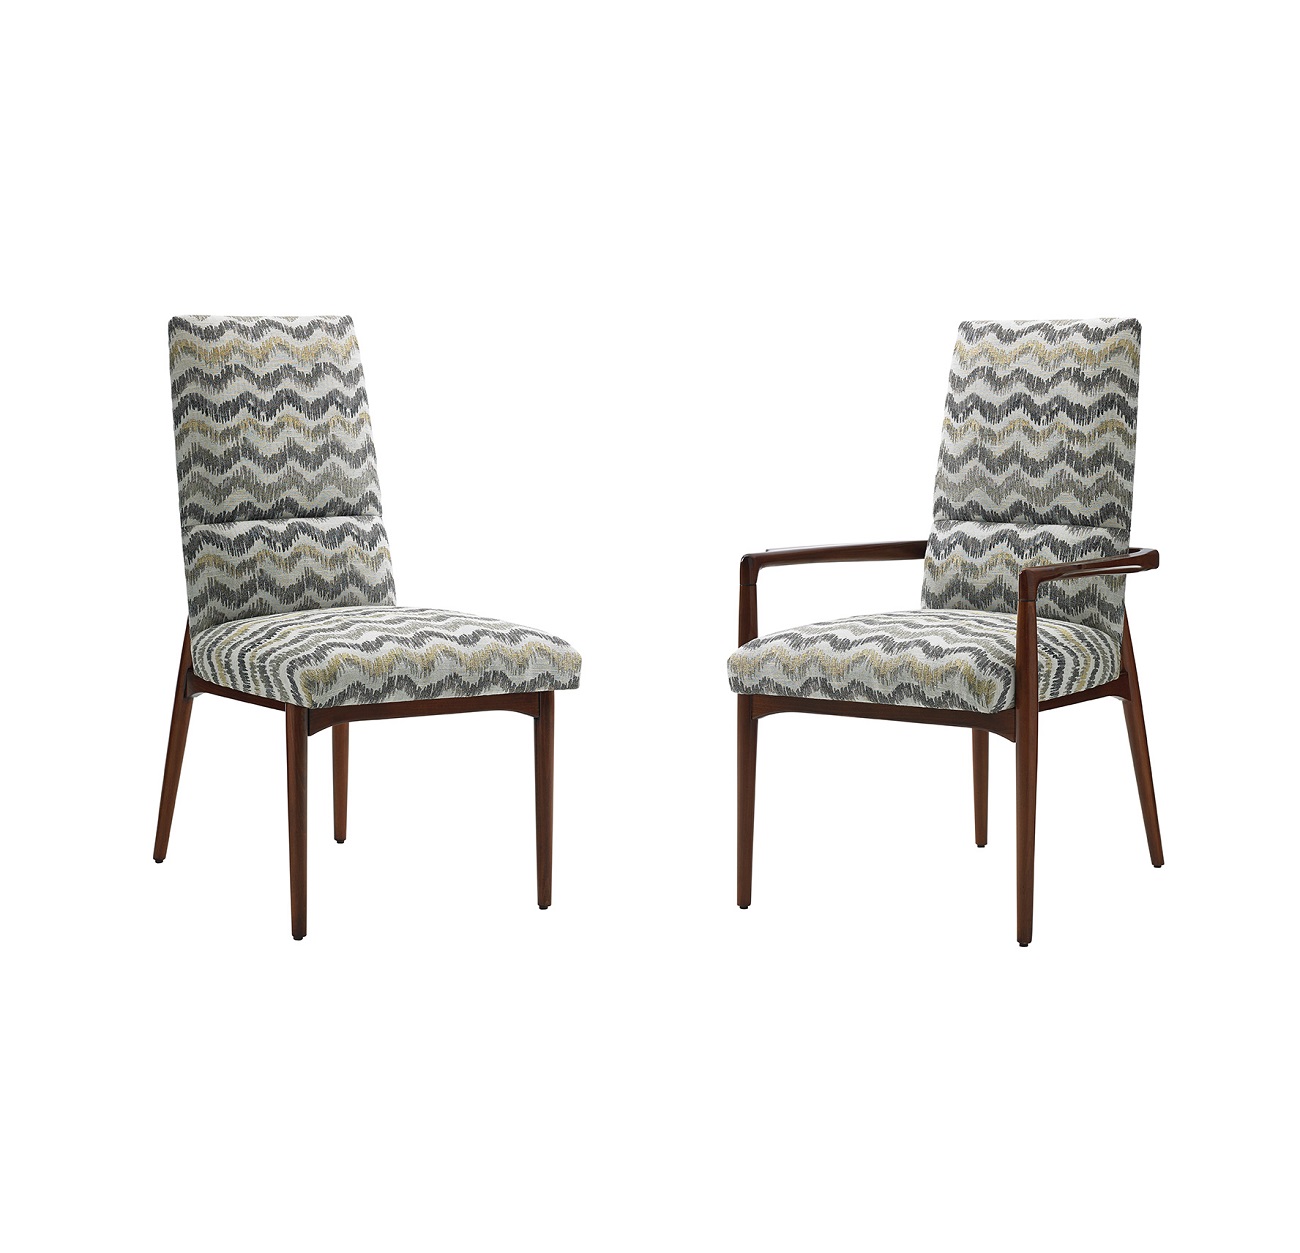 Take Five Chelsea Dining Chair, Lexington Dining Chair Online